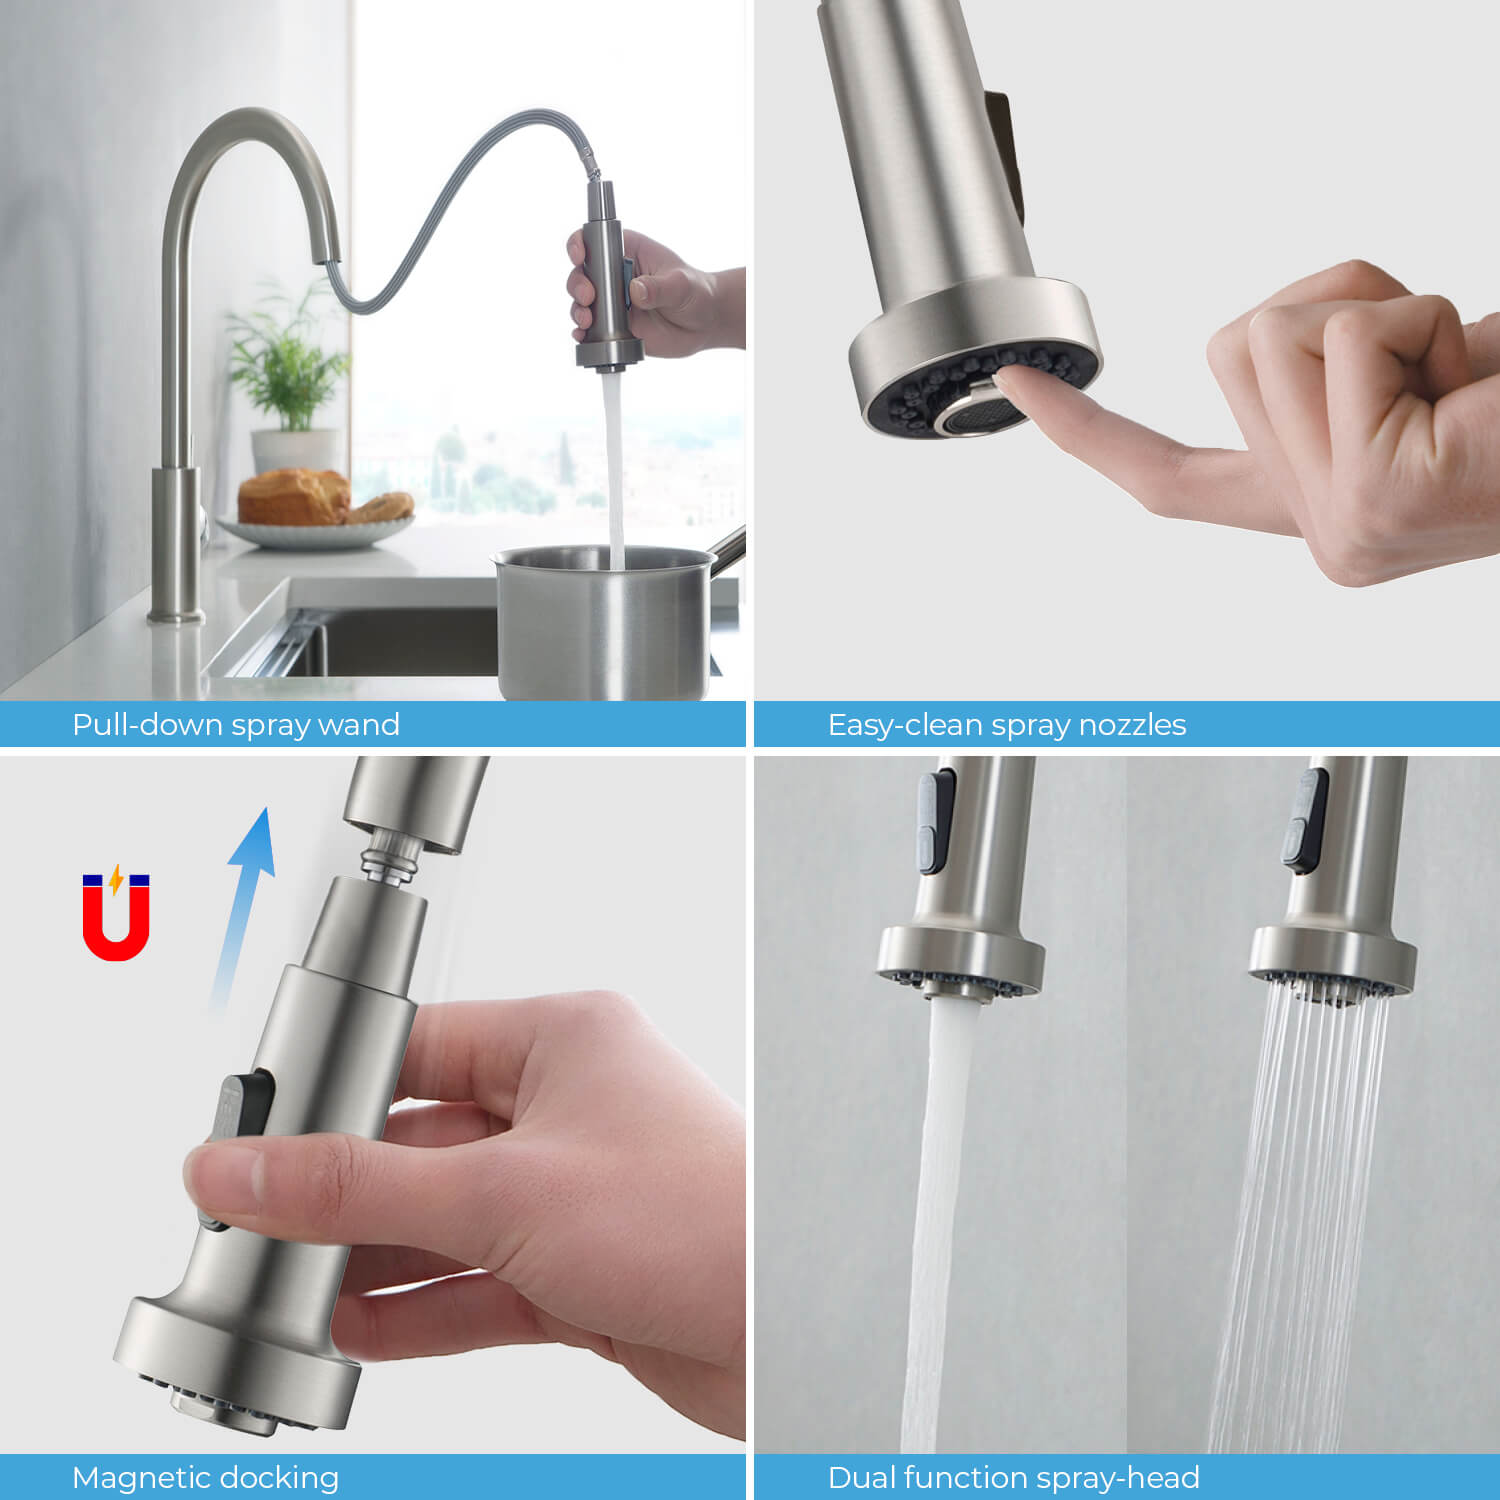 Kibi Casa Single Handle High Arc Pull Down Kitchen Faucet in Brushed Nickel Finish